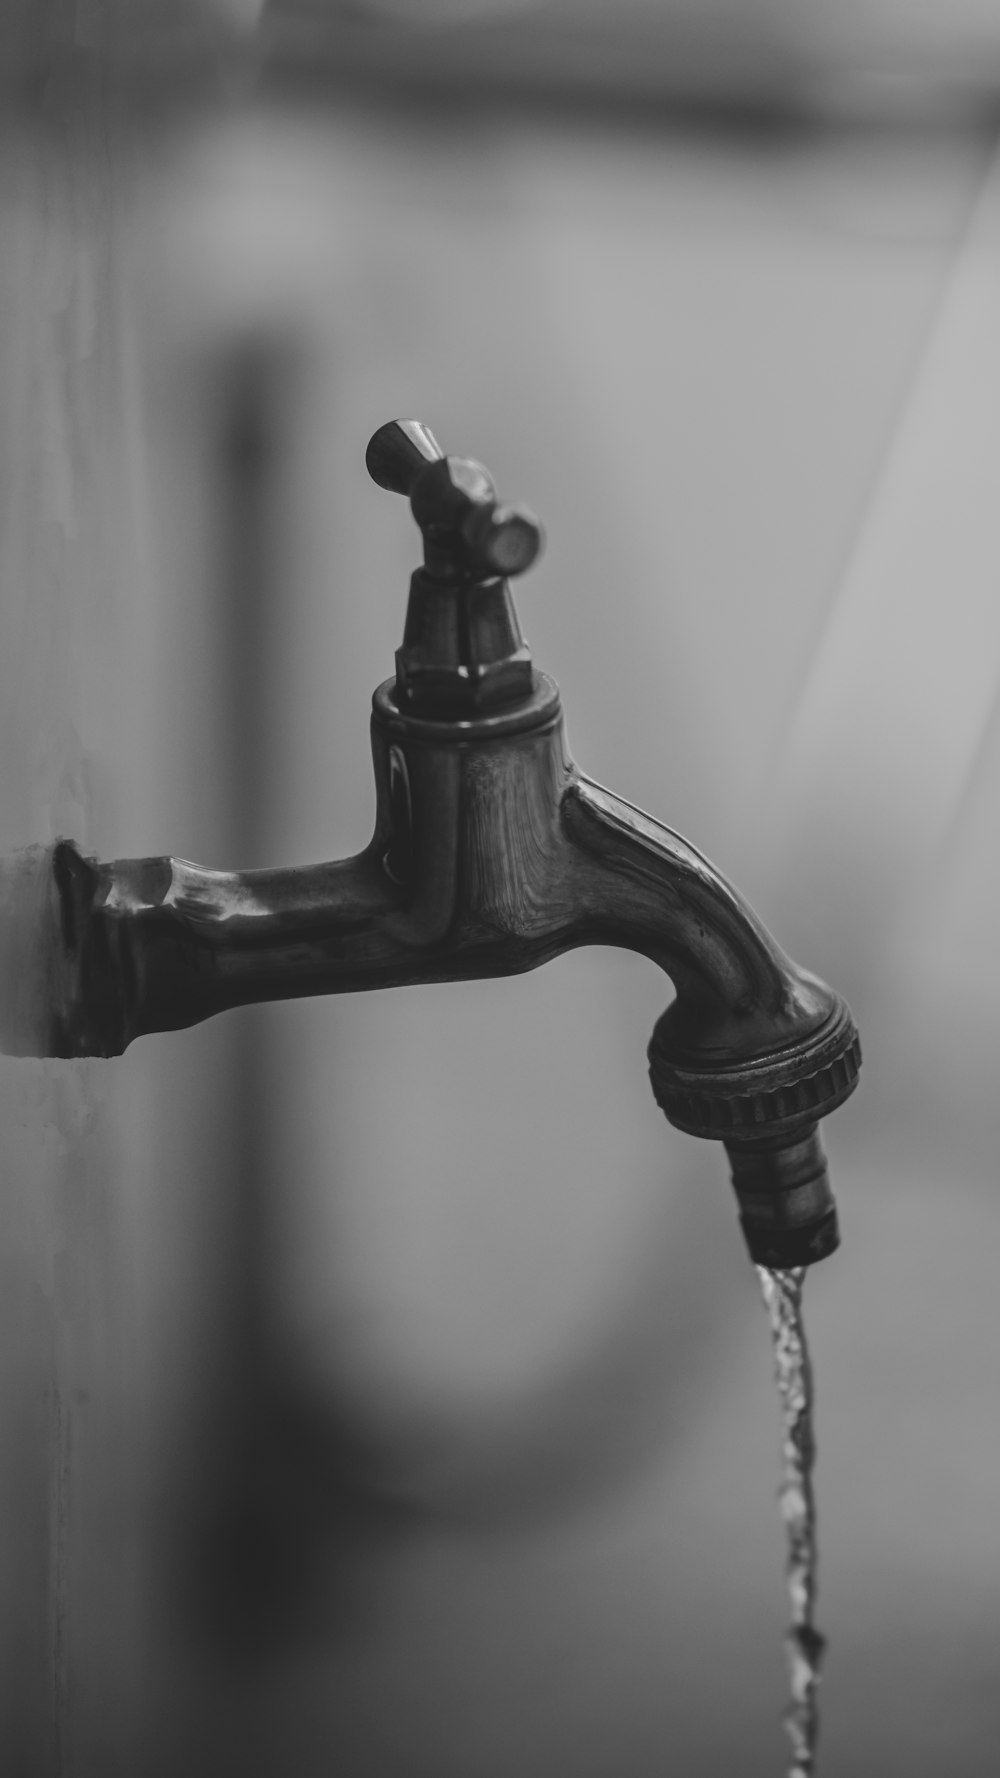 black faucet in grayscale photography